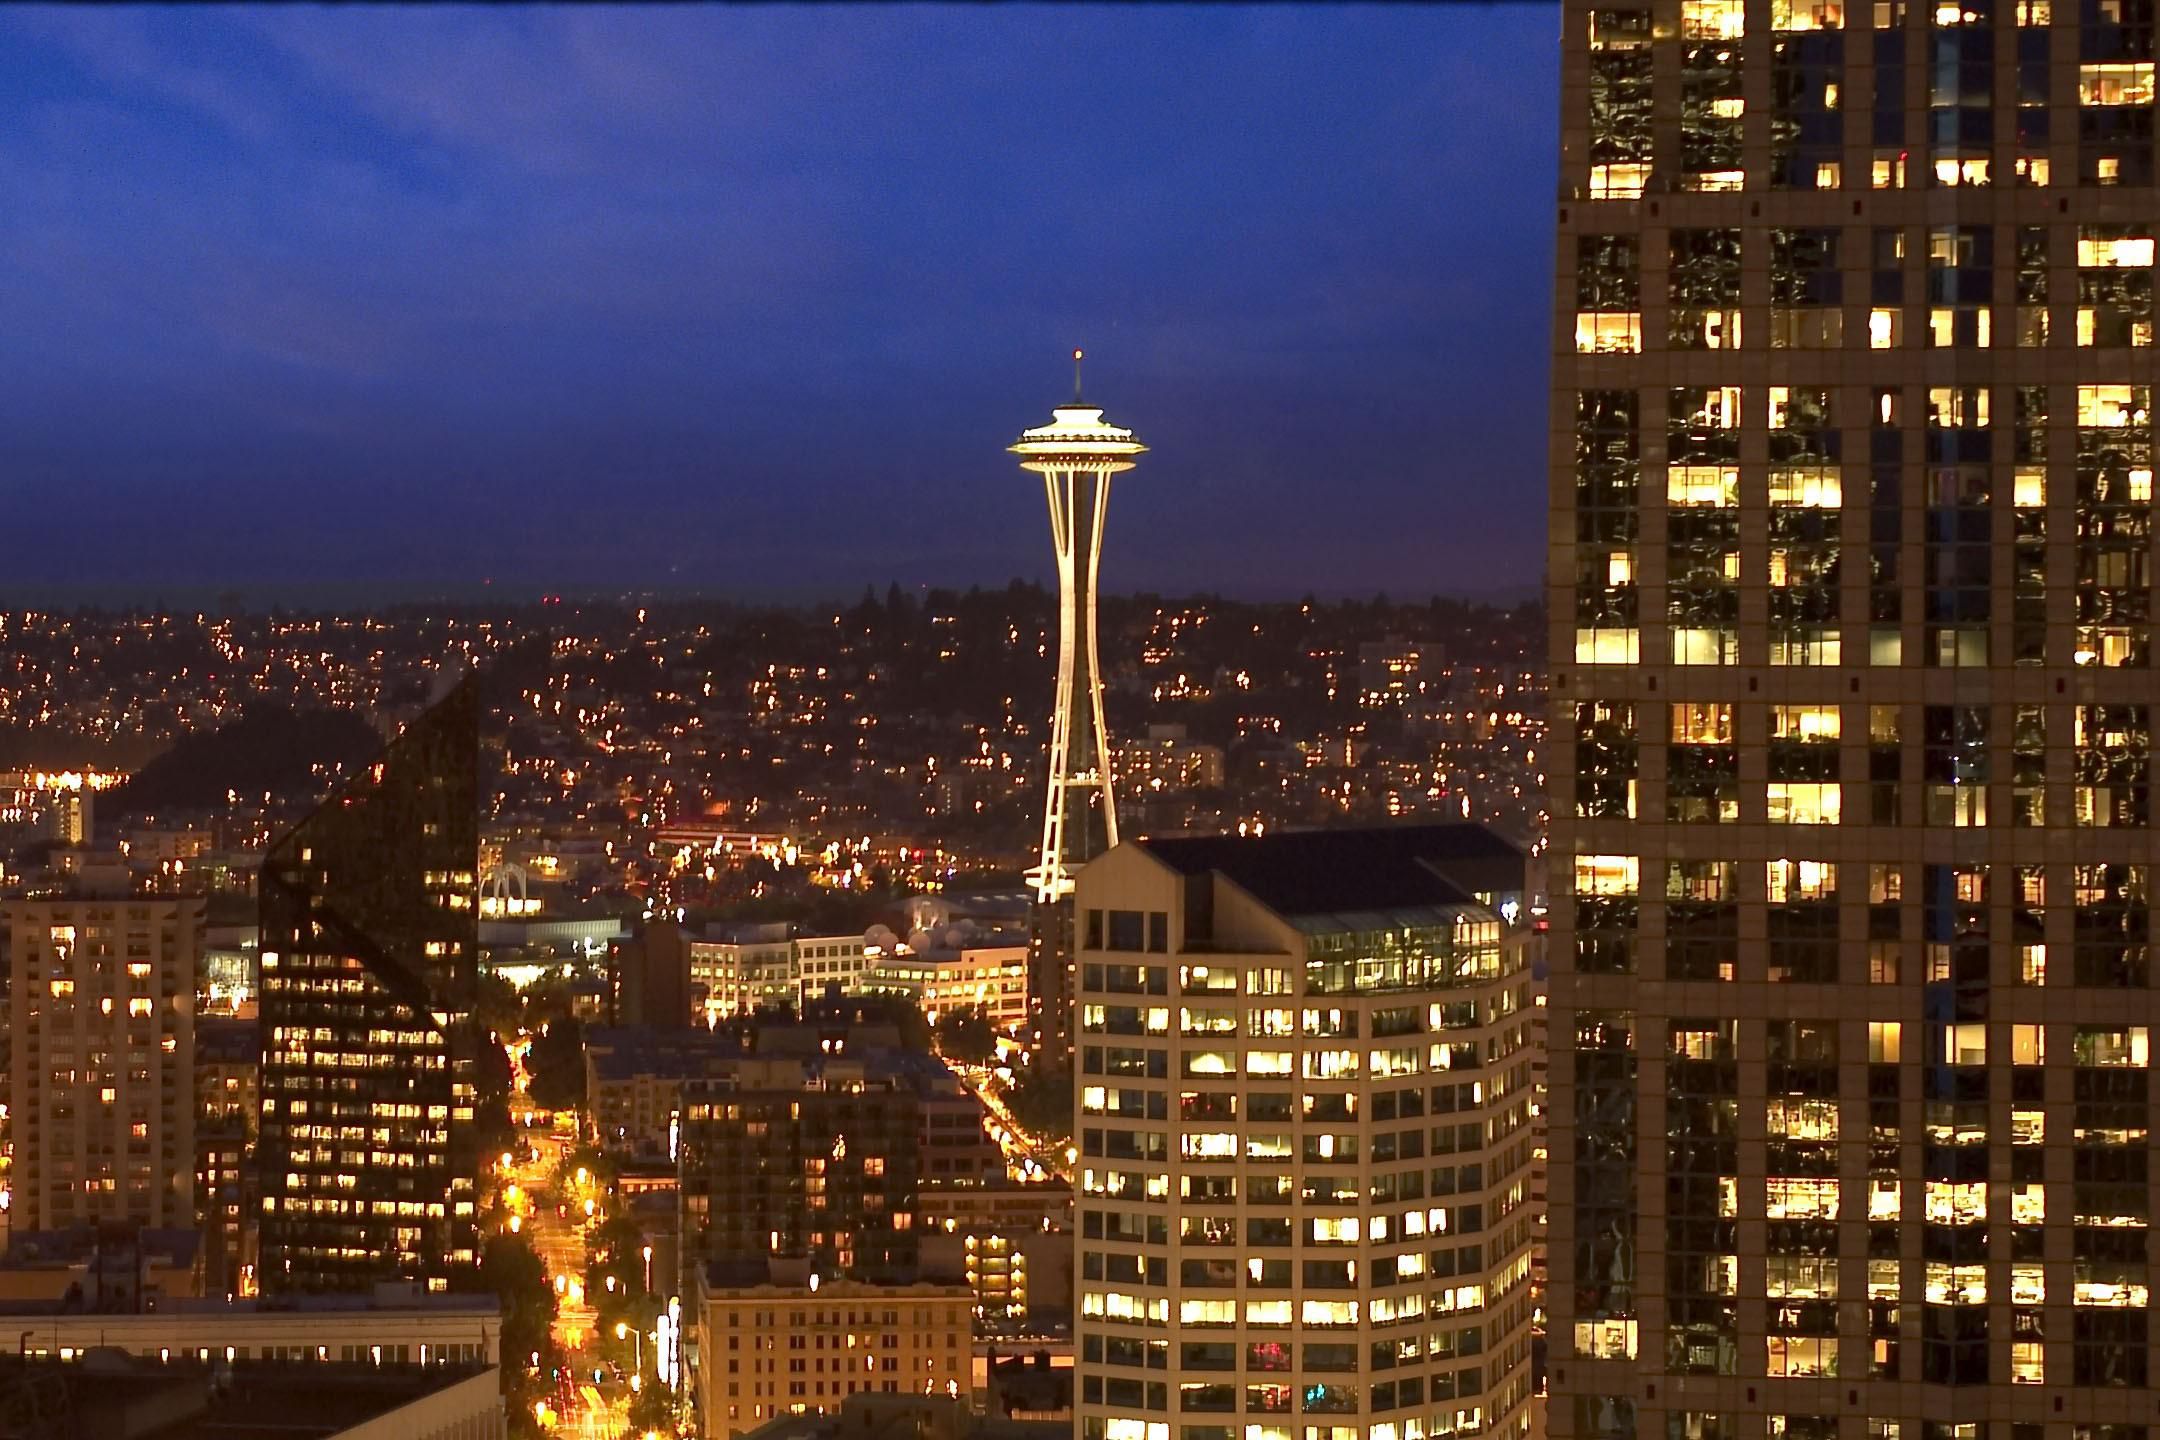 What is there to do at night in Seattle?